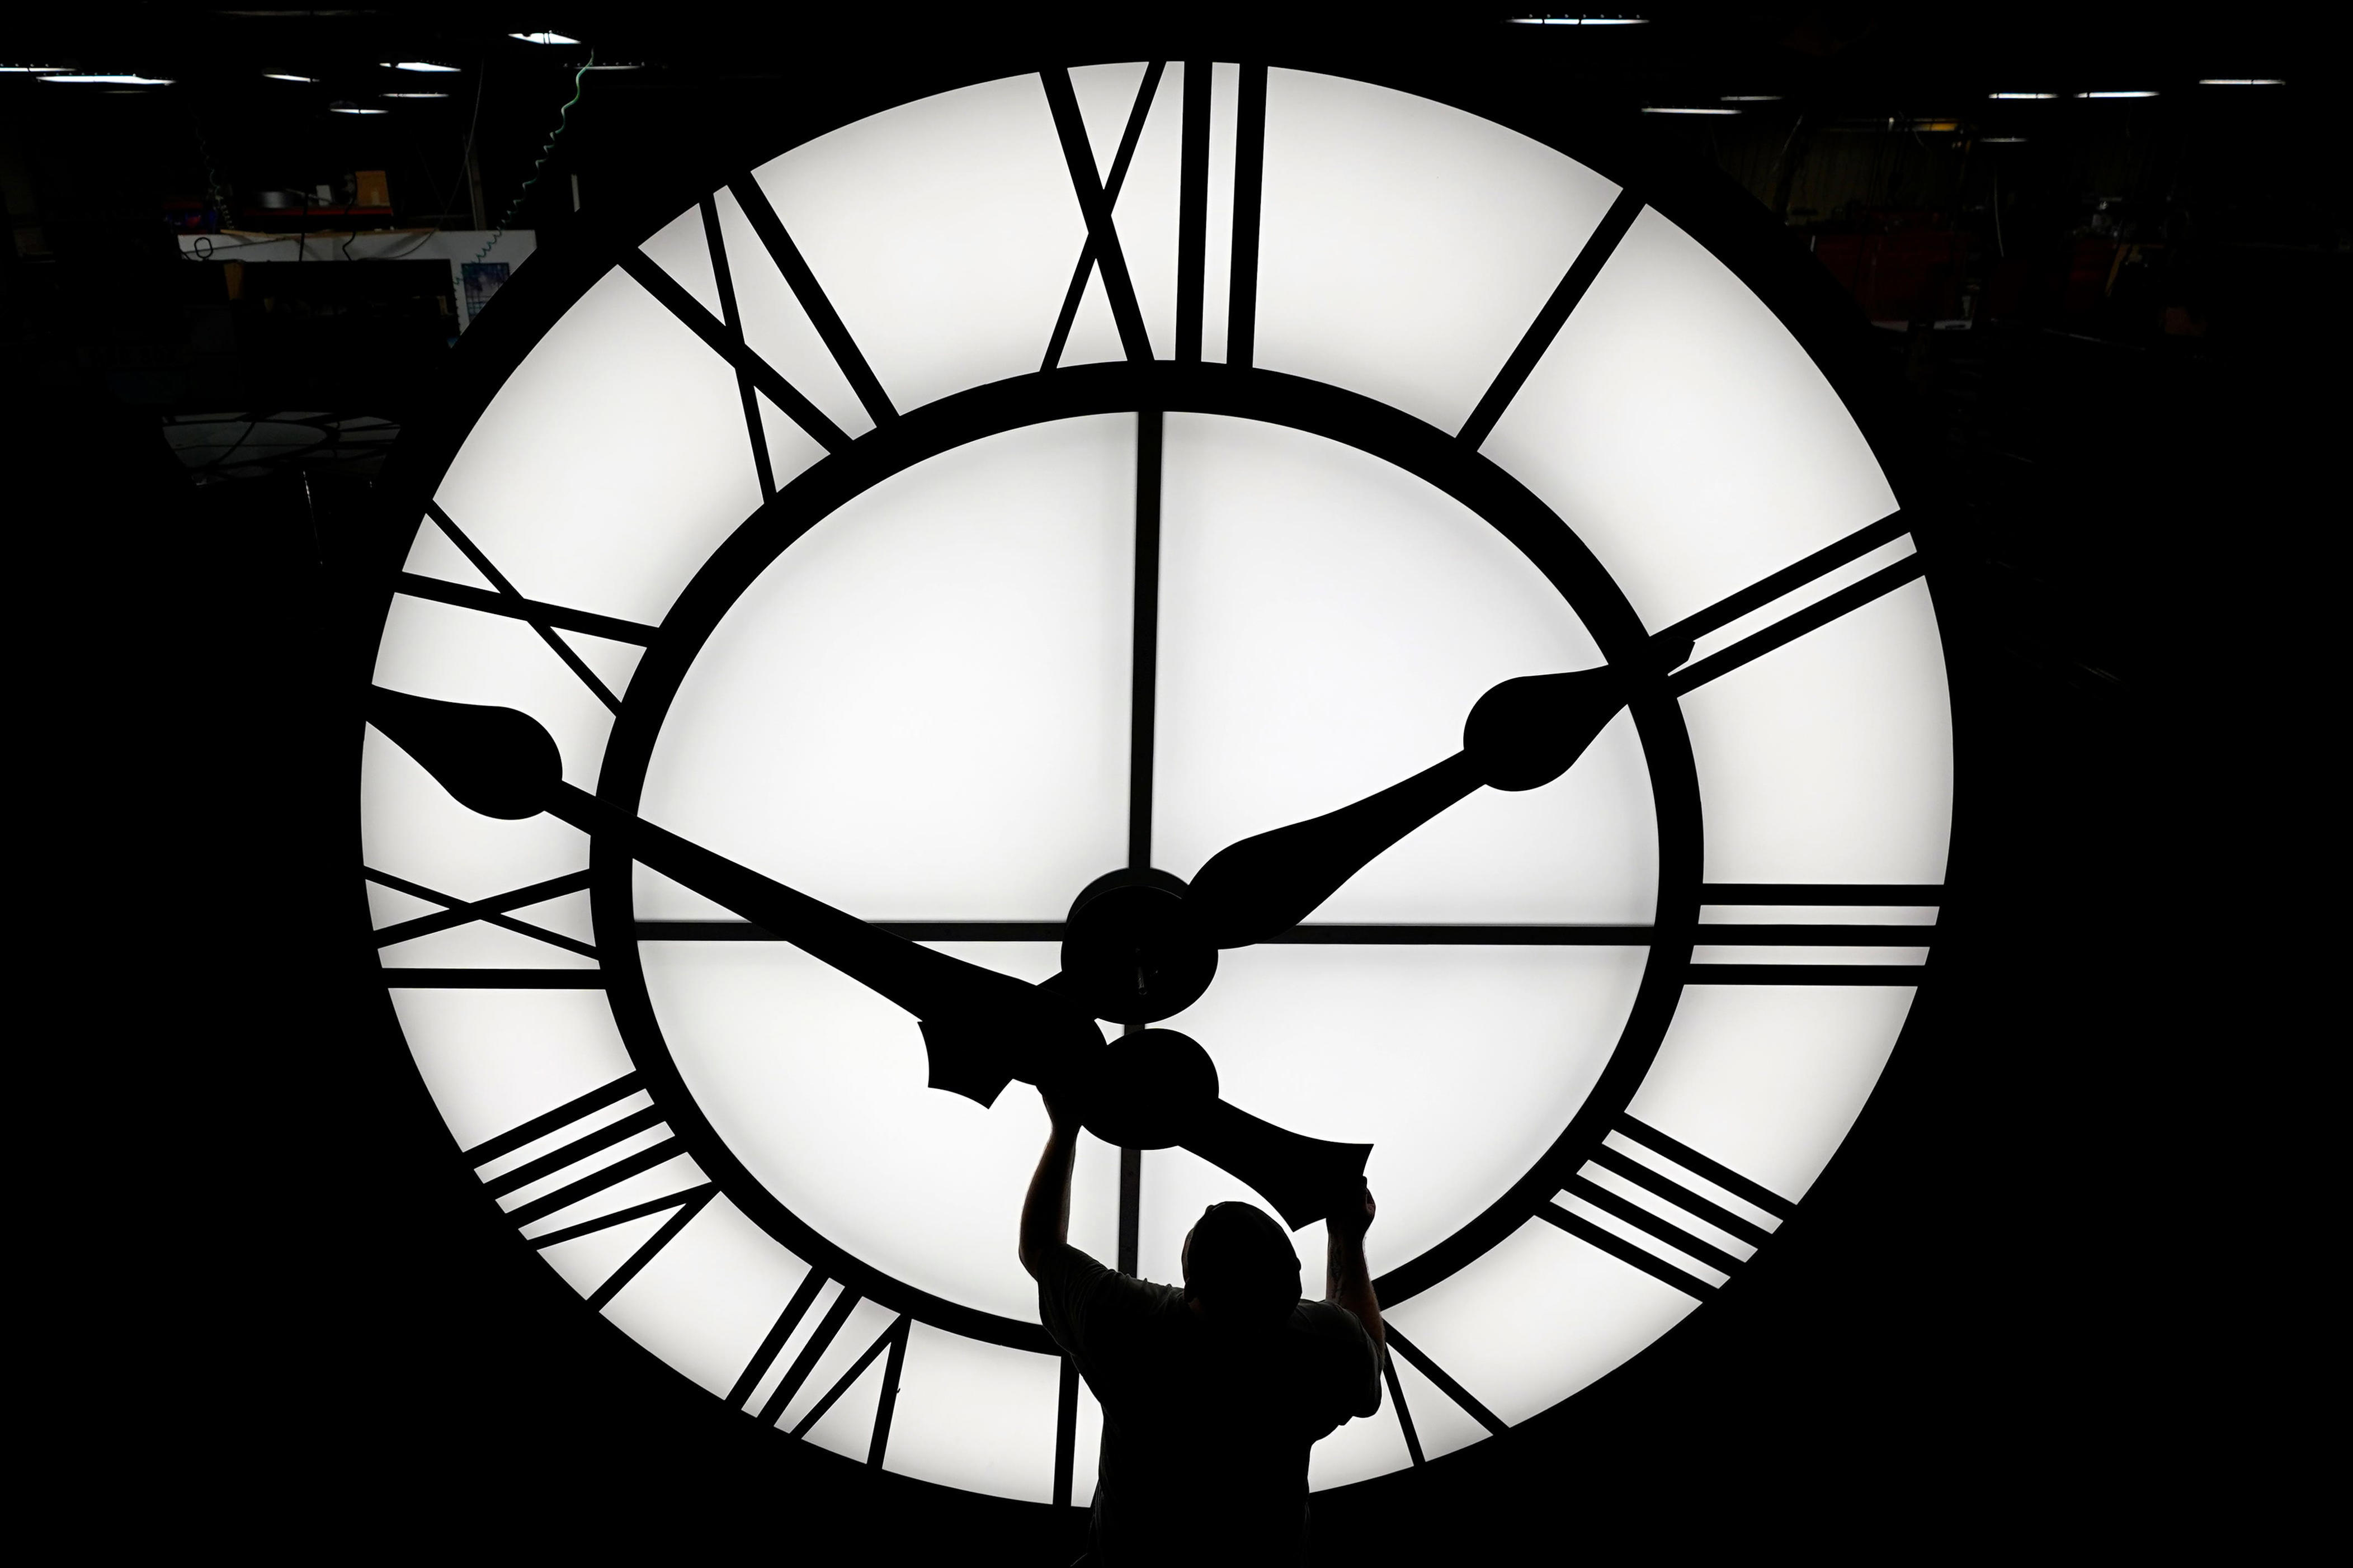 When does daylight saving time start? What is it? Here's when to